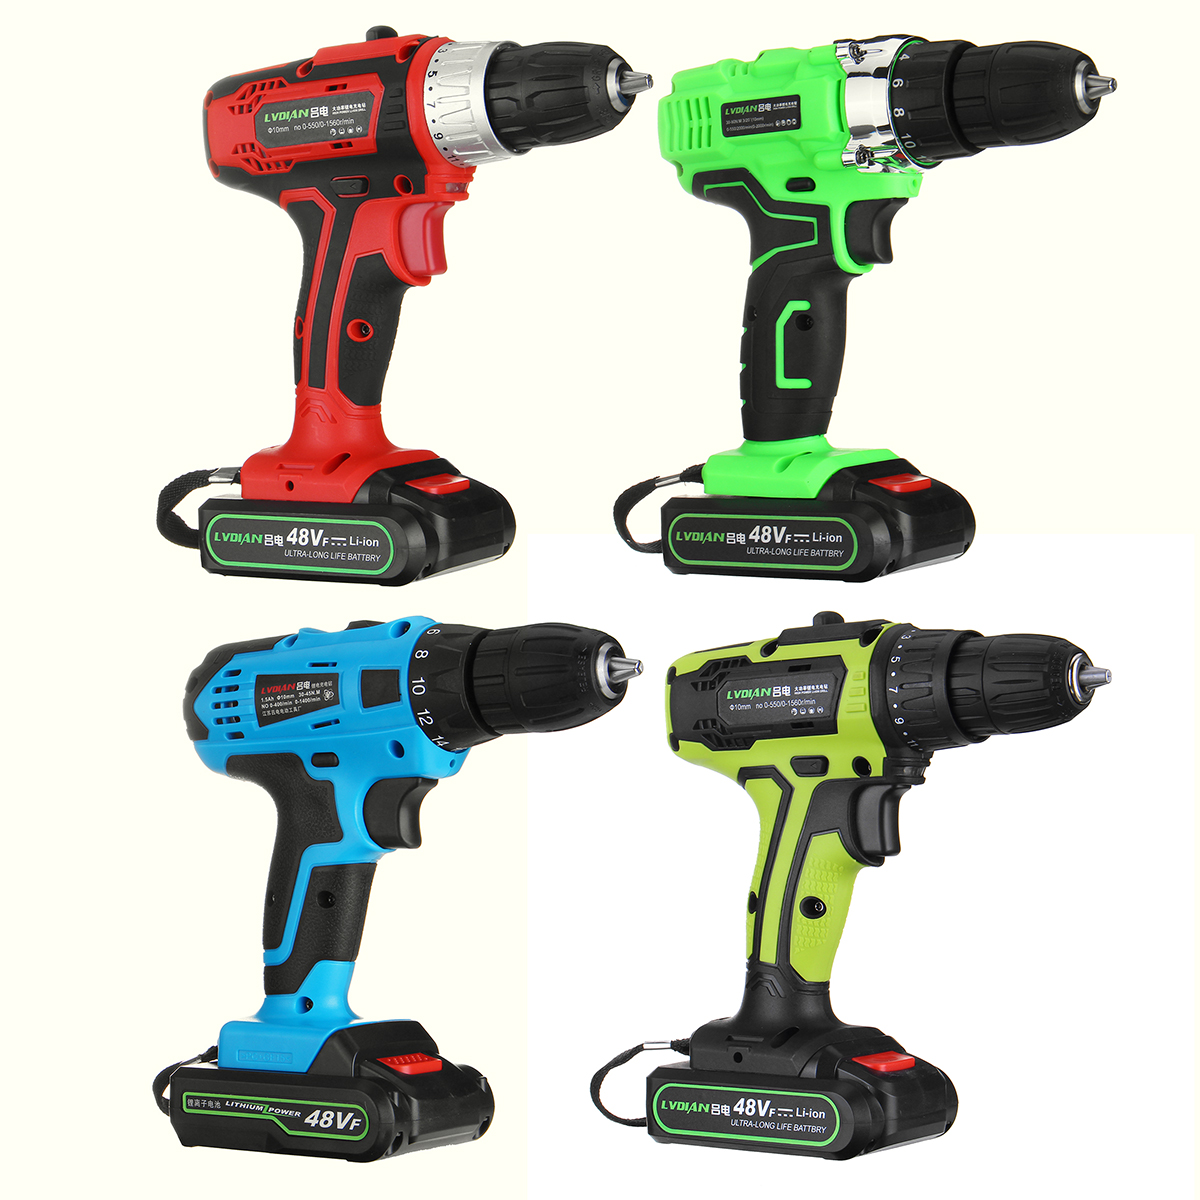 48V-2-Speed-Cordless-Electric-Screwdriver-Drill-LED-Rechargeable-Waterproof-Electric-Power-Dirver-Dr-1599546-5